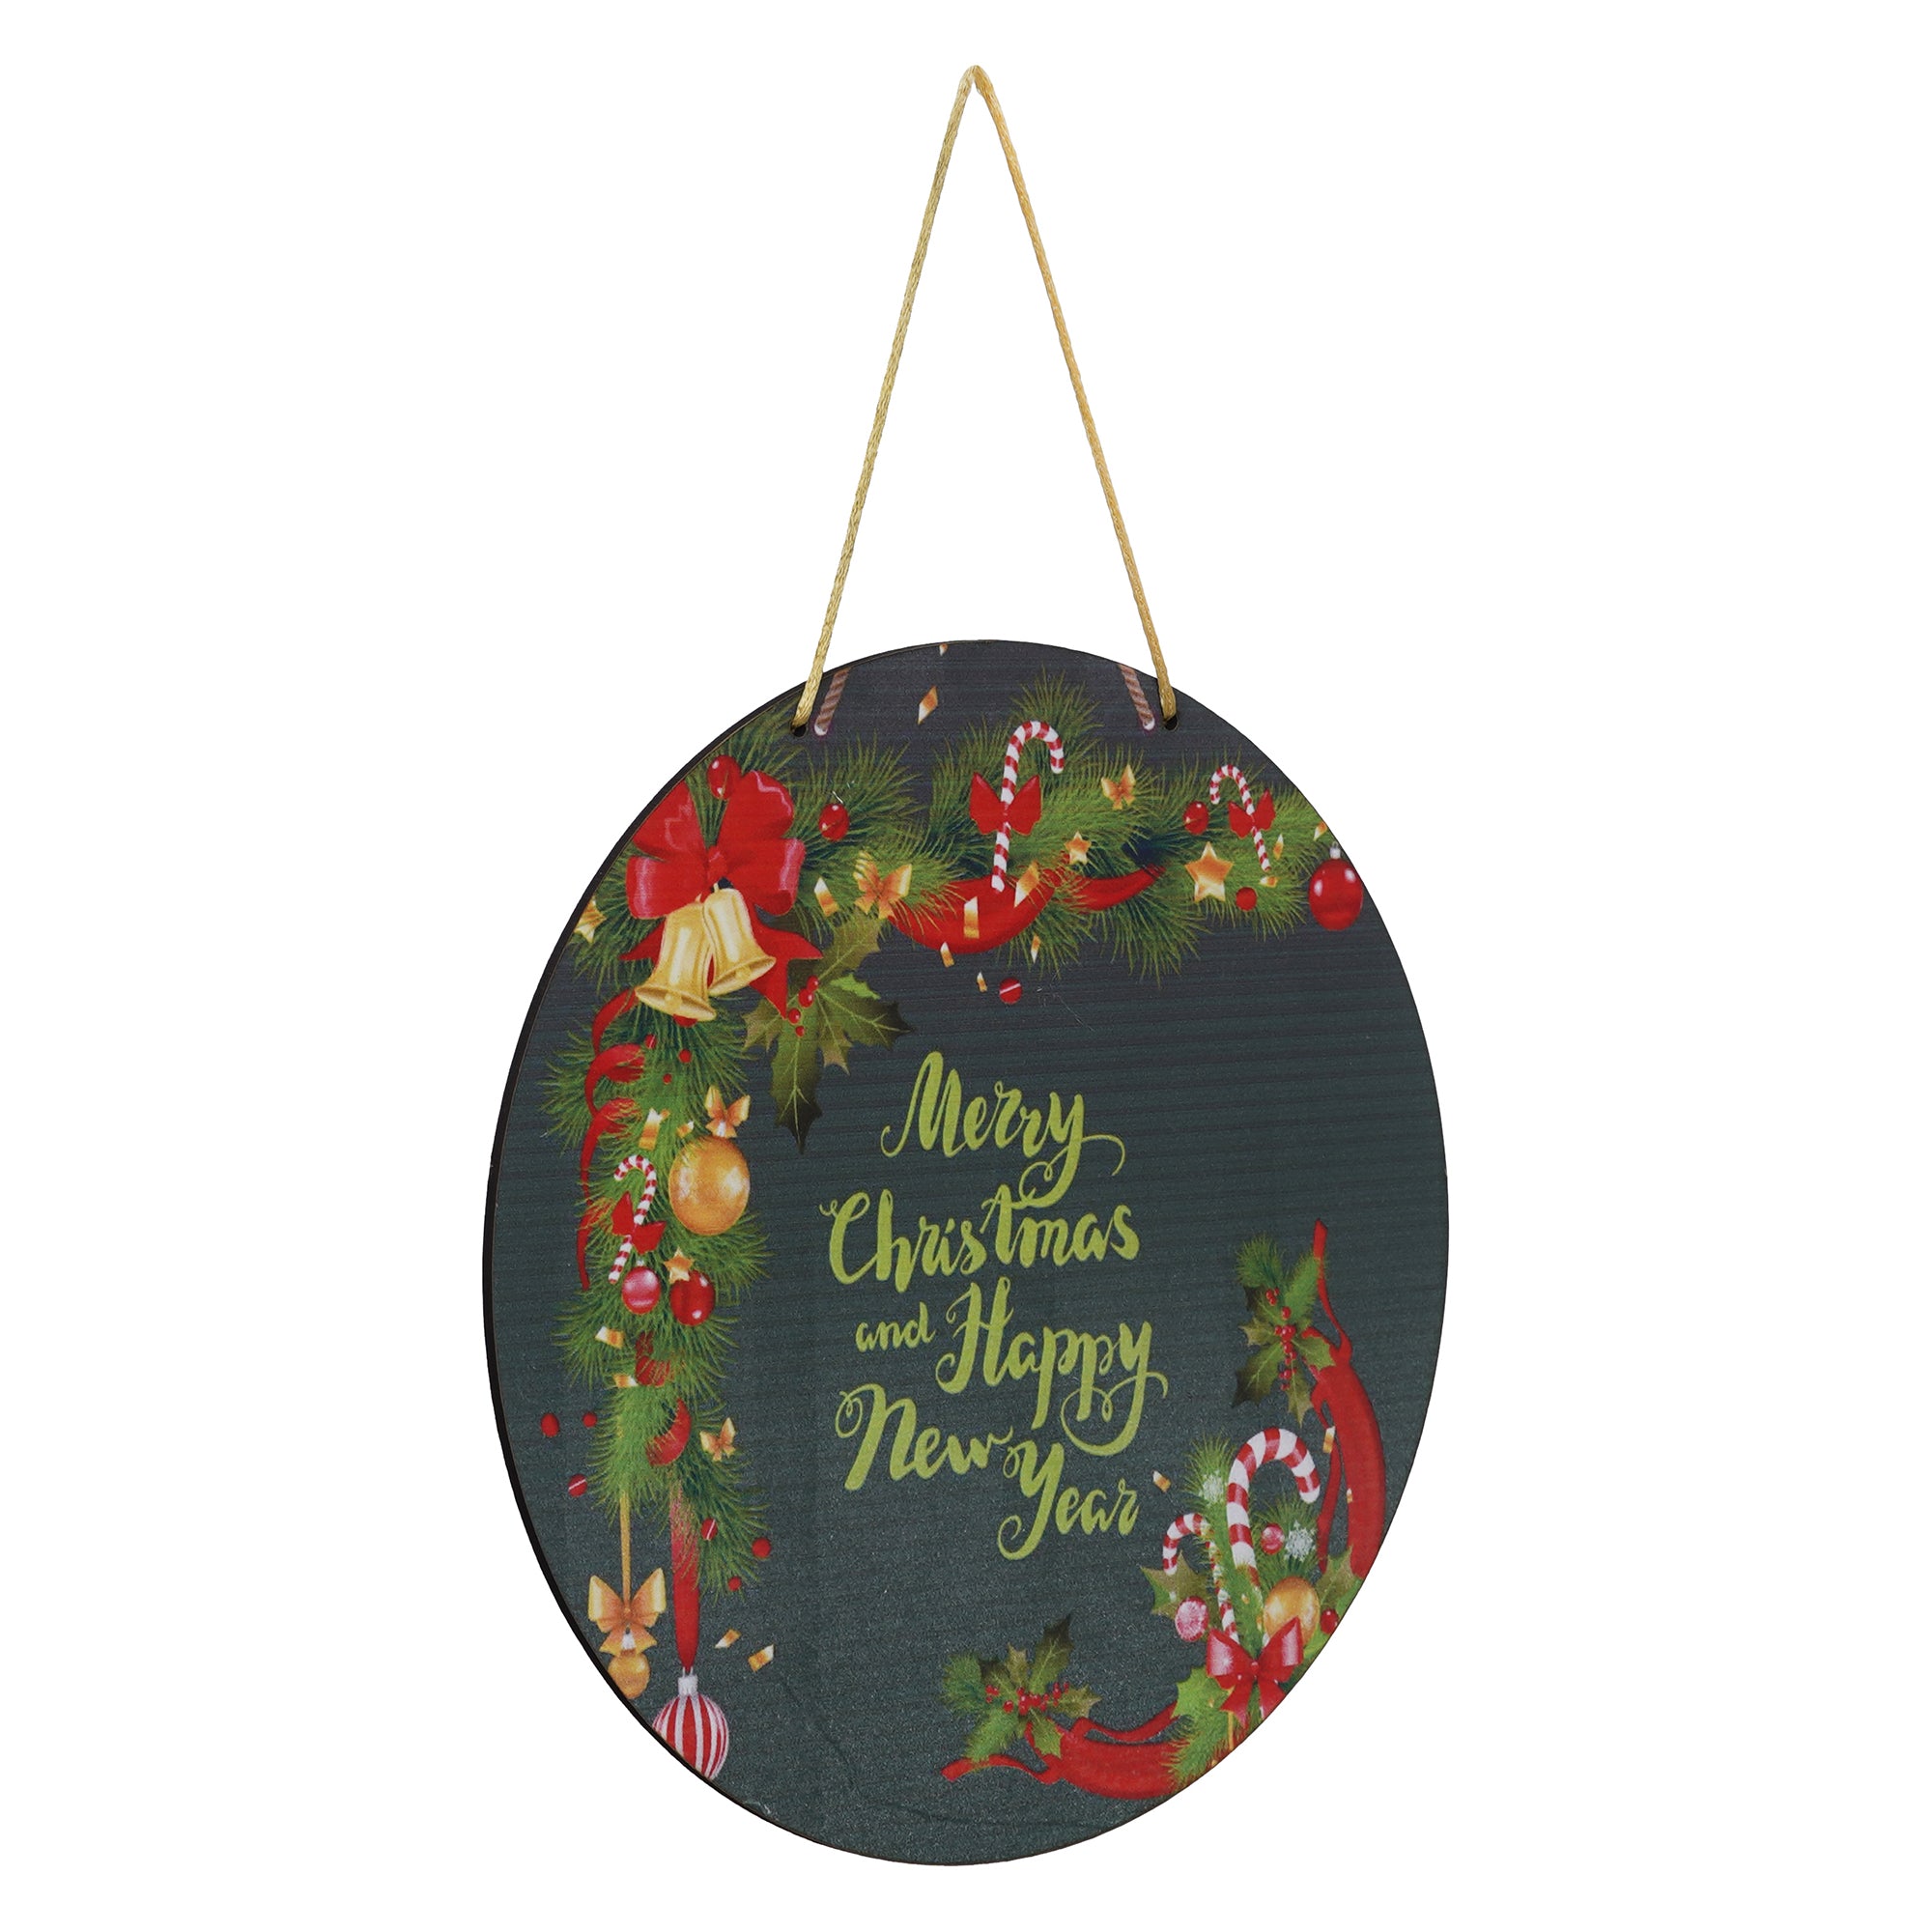 eCraftIndia "Merry Christmas and Happy New Year" Printed Wall/Door Hanging for Home and Christmas Decorations (Green, Red, Golden) 6